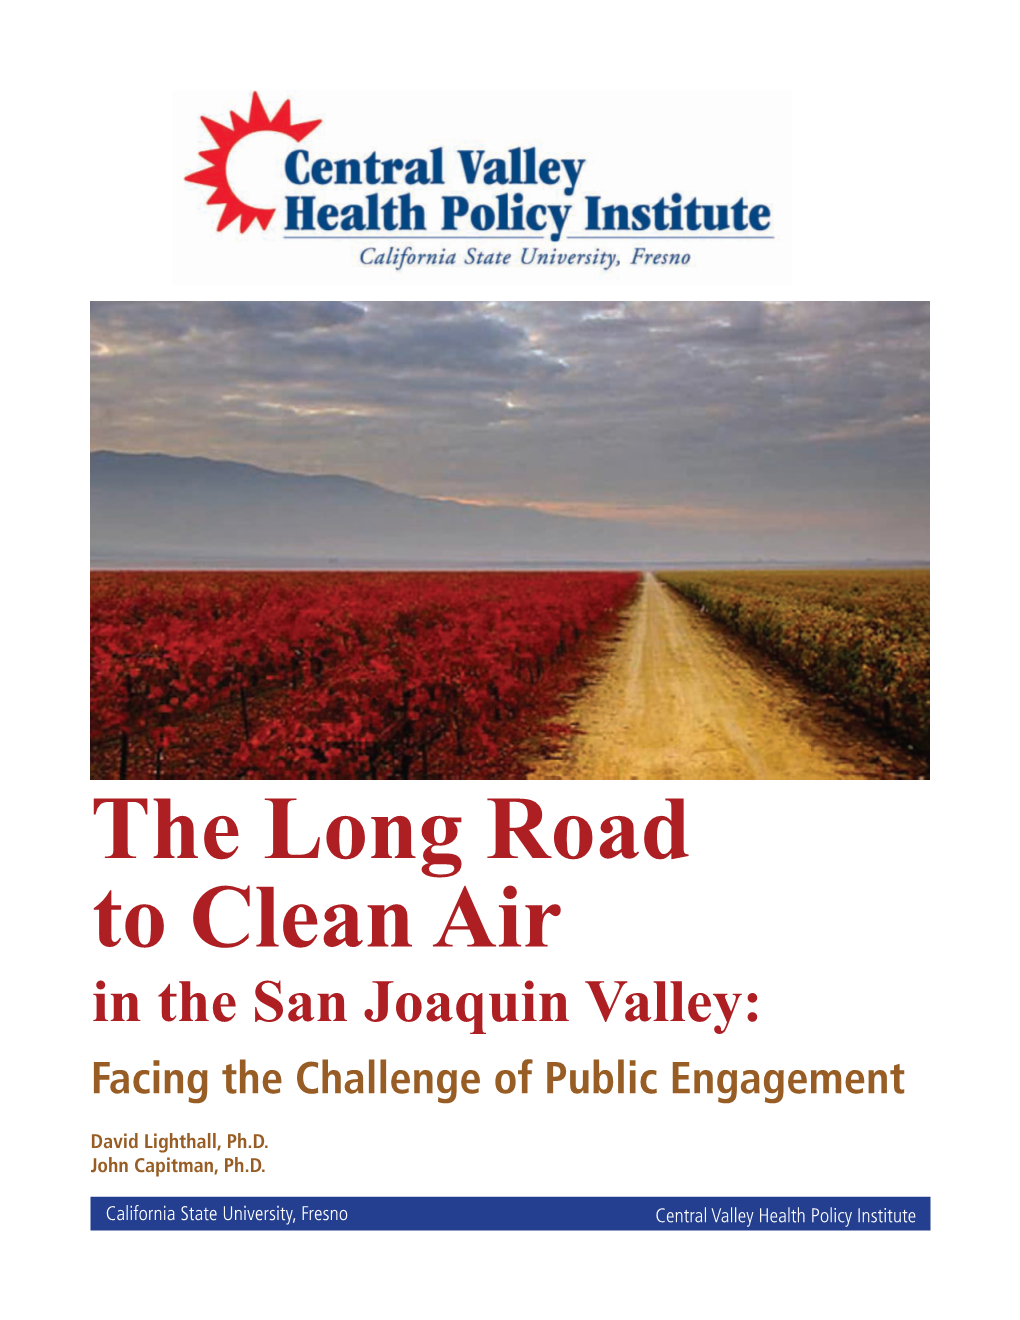 San Joaquin Valley: Facing the Challenge of Public Engagement